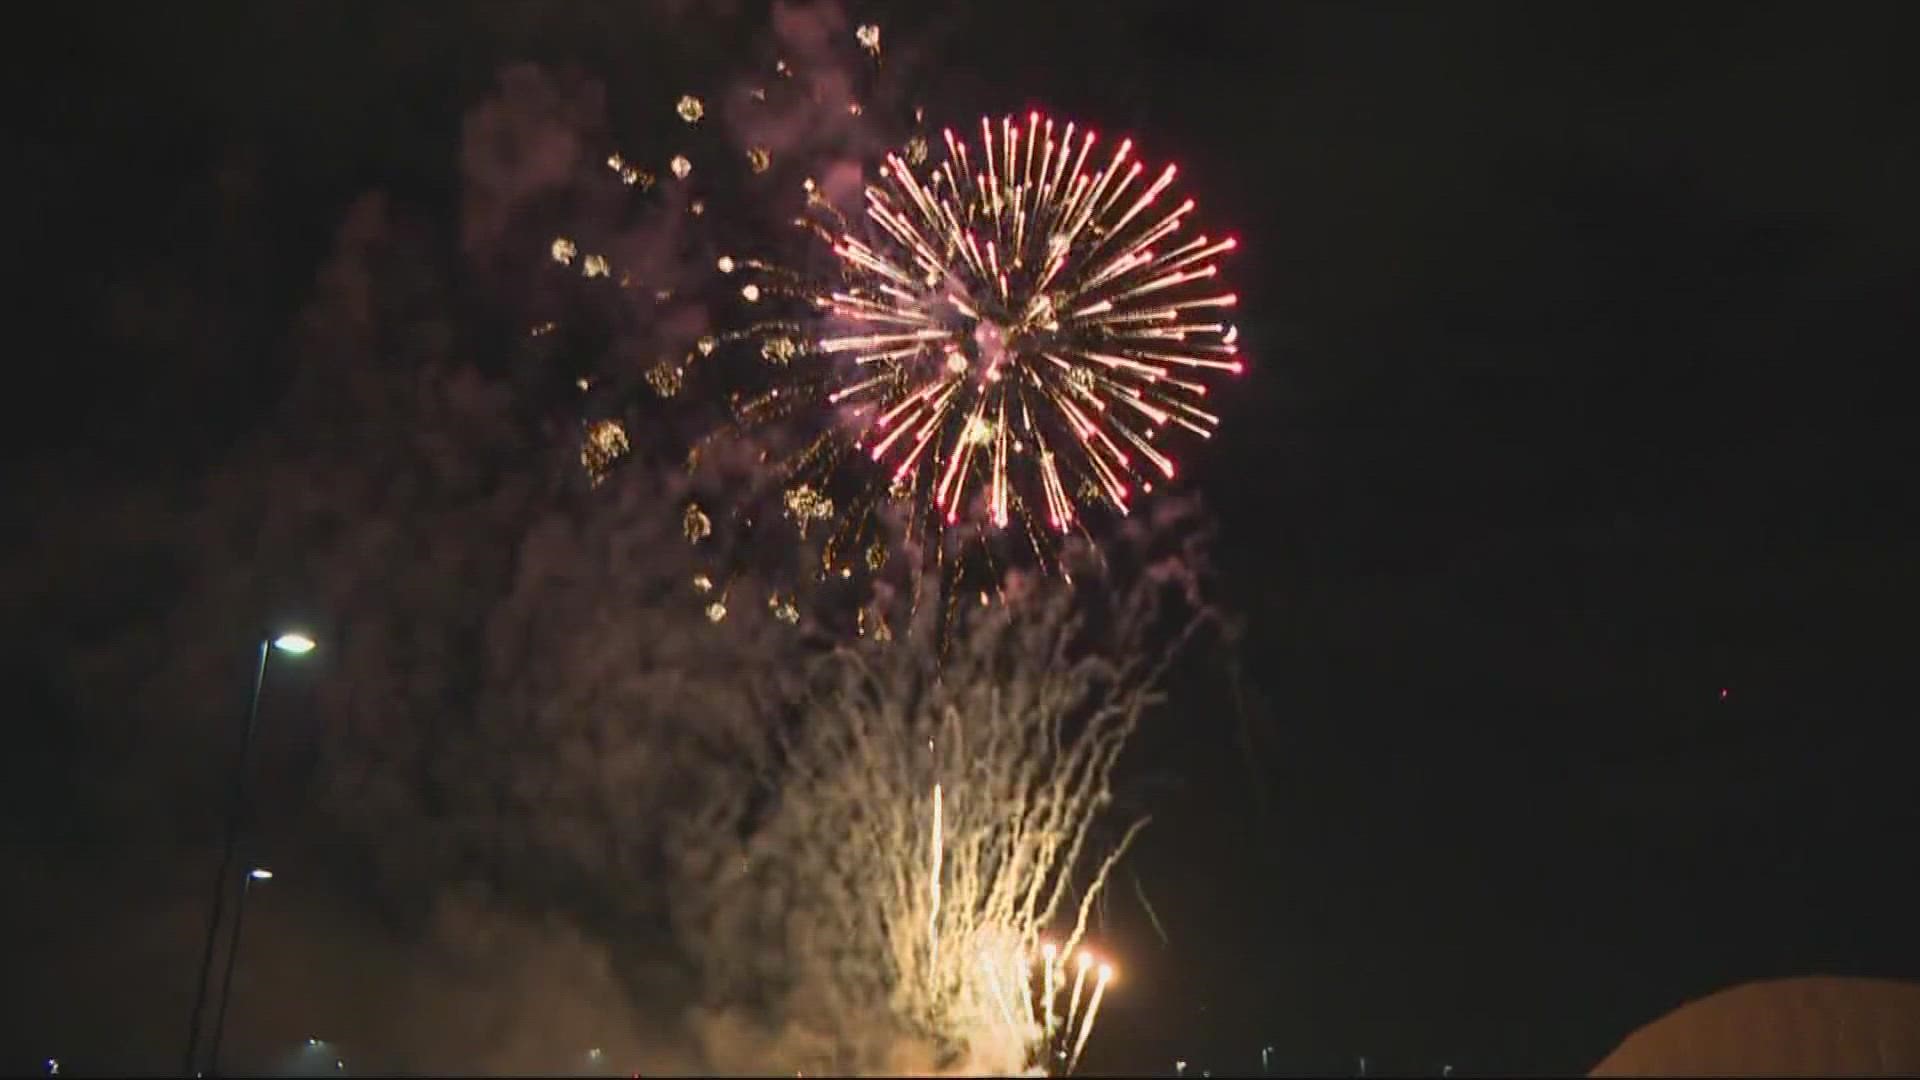 Getting legal fireworks in Arizona can be tricky. 12News updates you on the legality and potential dangers they possess ahead of New Years.